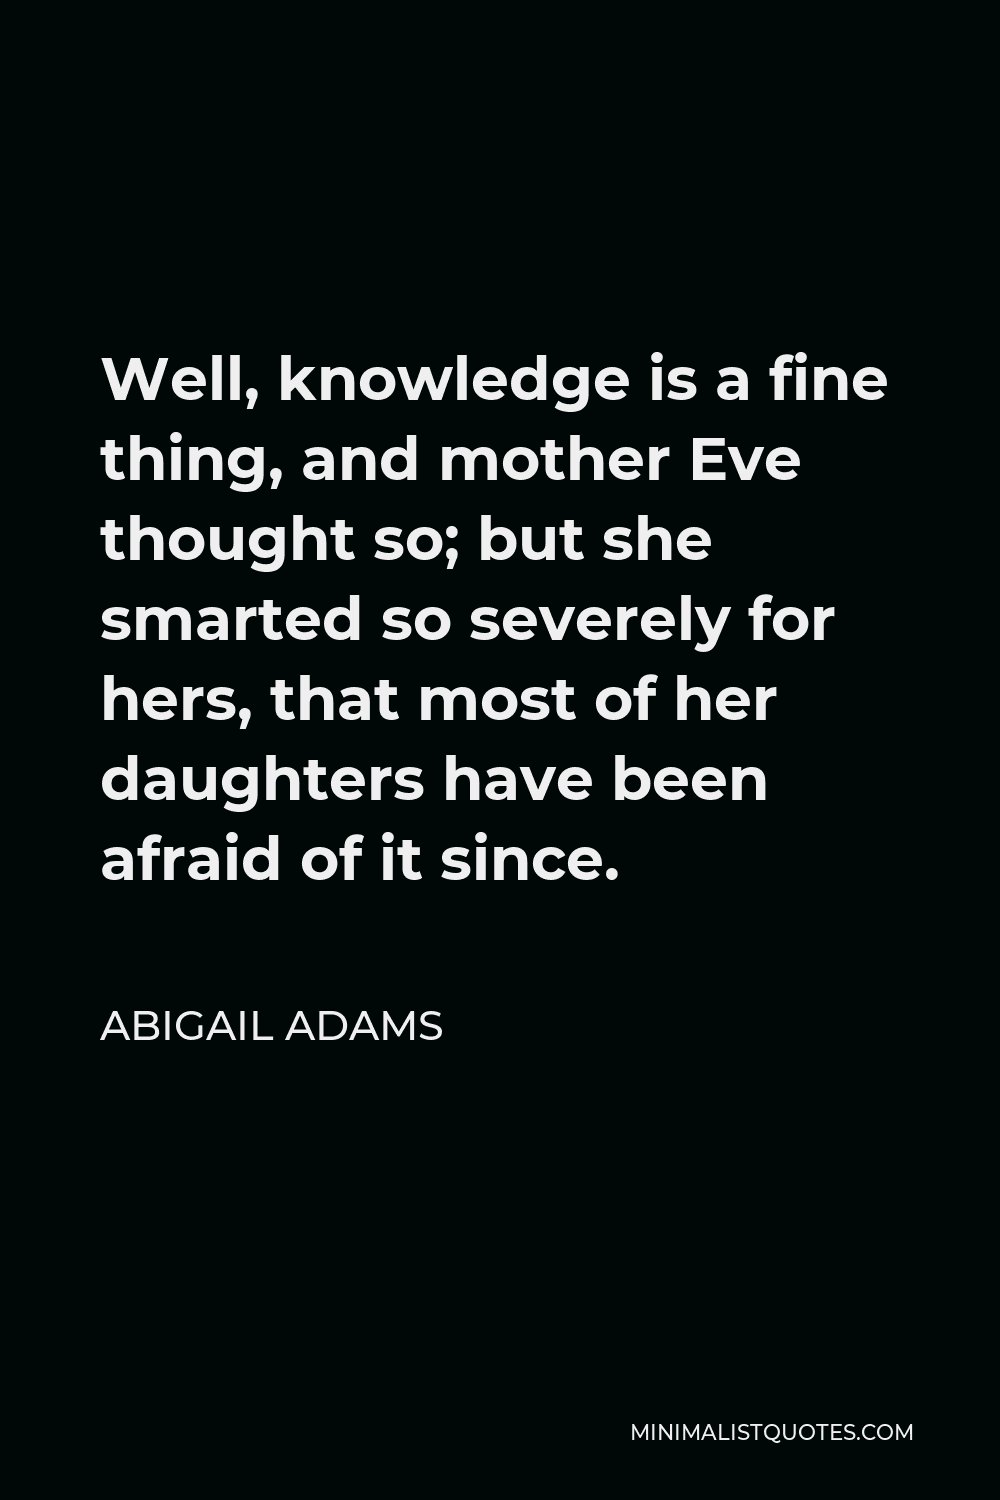 Abigail Adams Quote - Well, knowledge is a fine thing, and mother Eve thought so; but she smarted so severely for hers, that most of her daughters have been afraid of it since.